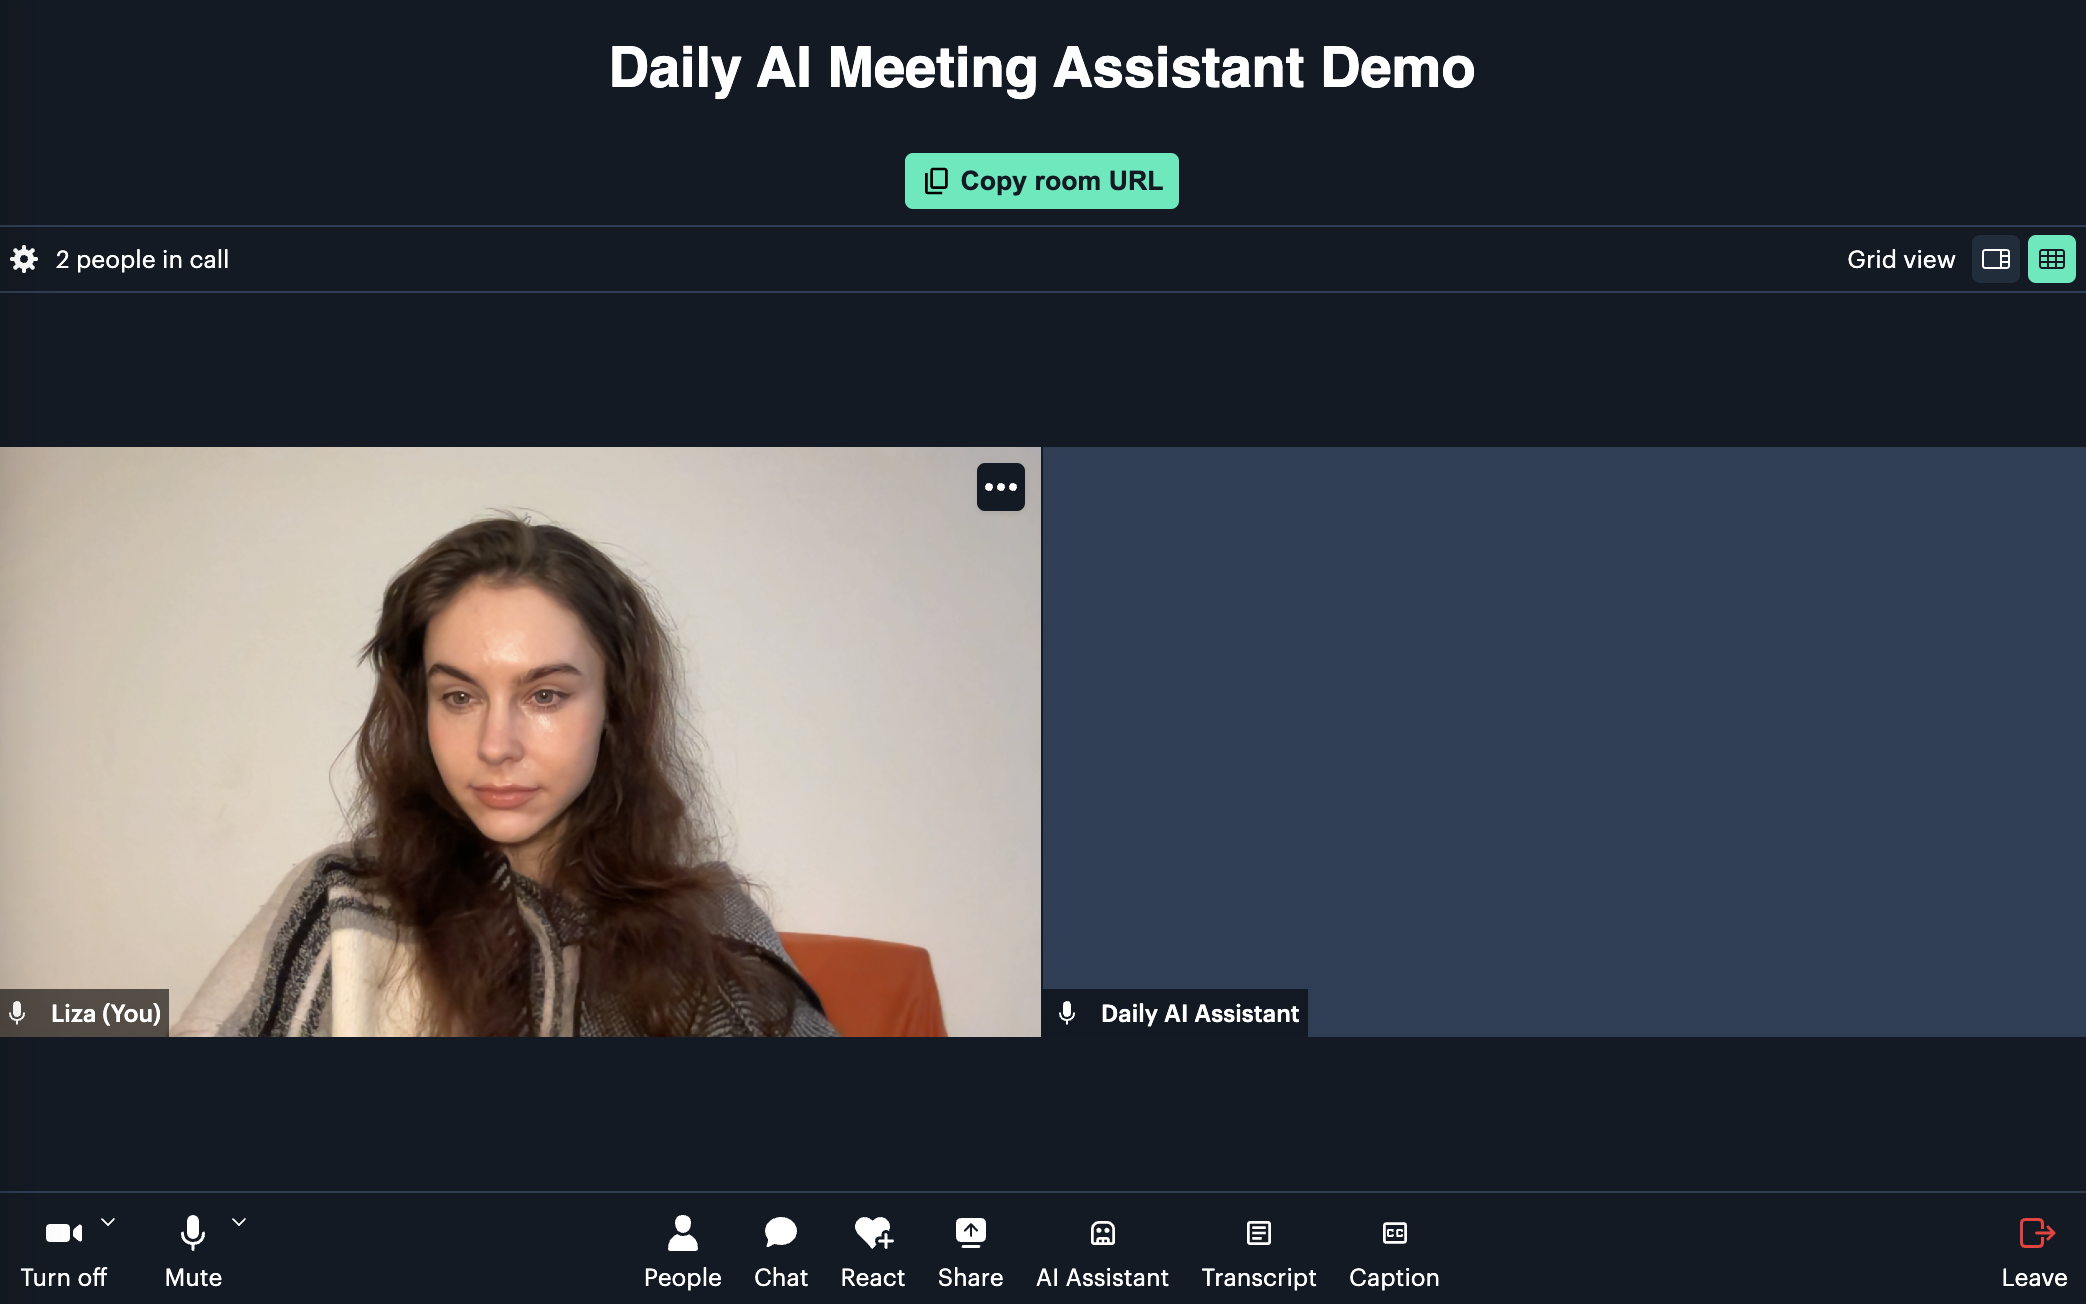 One human participant and one AI assistant in a Daily video call